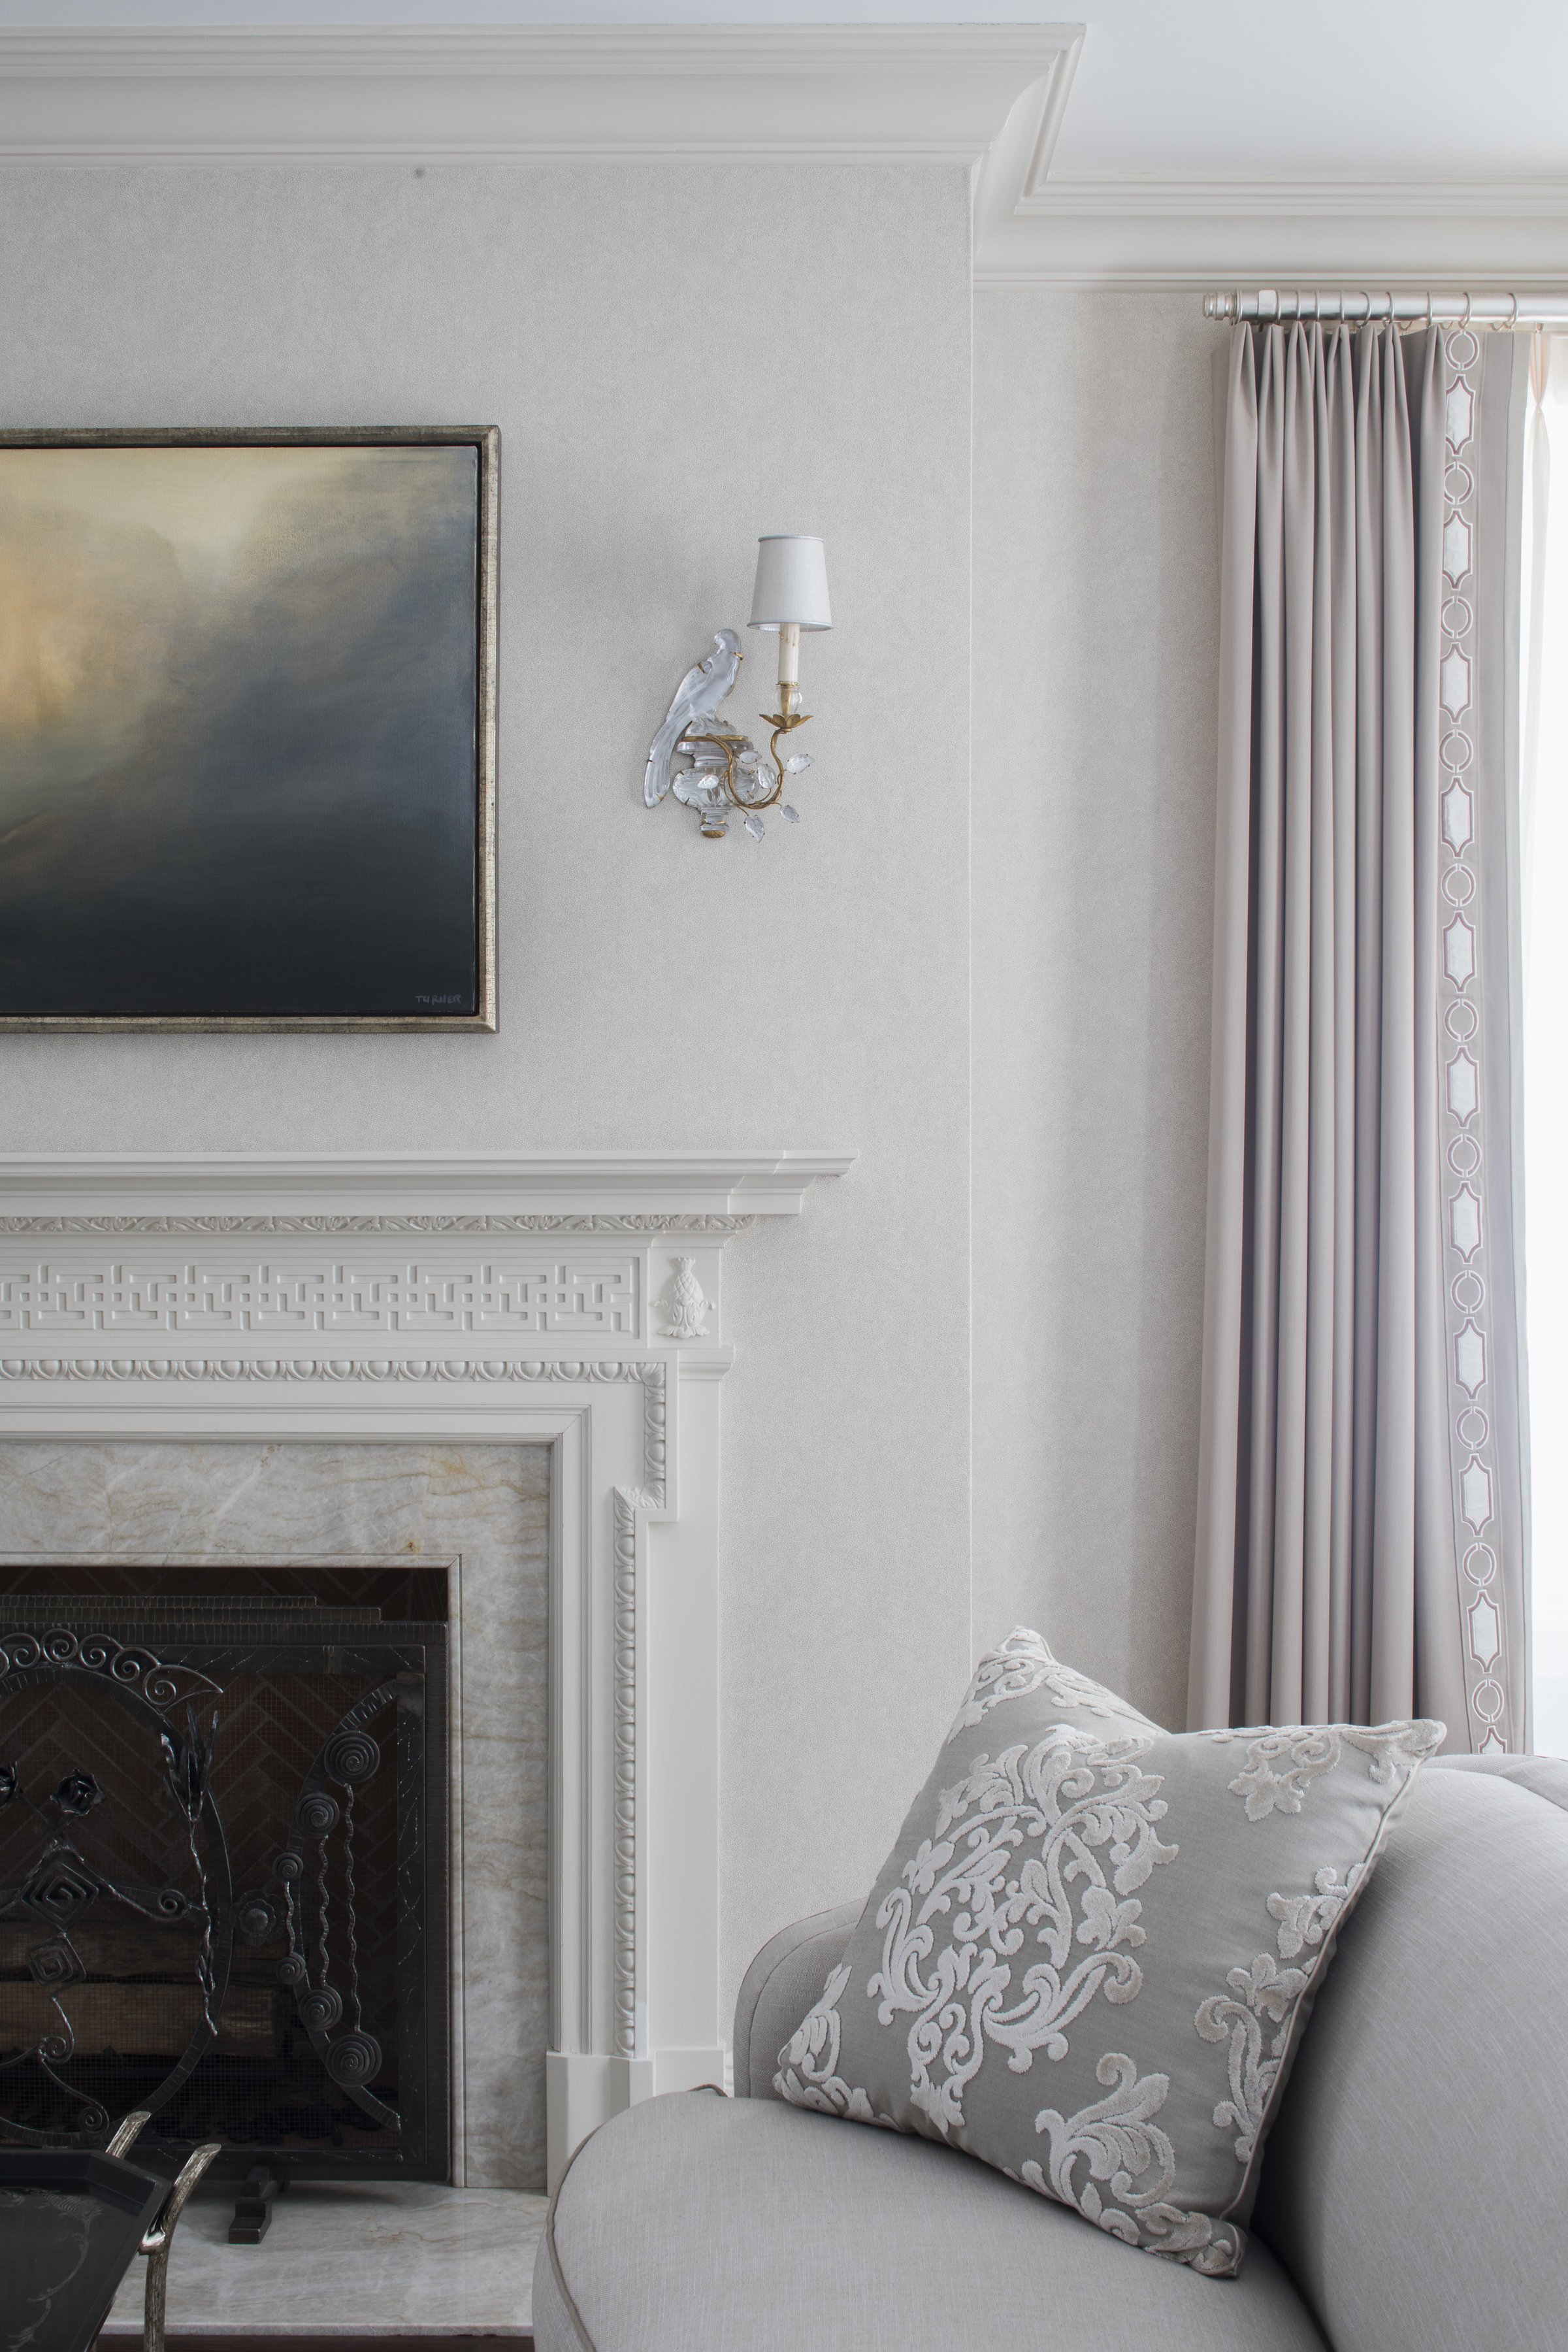 30-living-room-fireplace-gray-drapes-art-sconce-timeless-elegant-rinfret-neoclassical-greenwich-connecticut.JPG